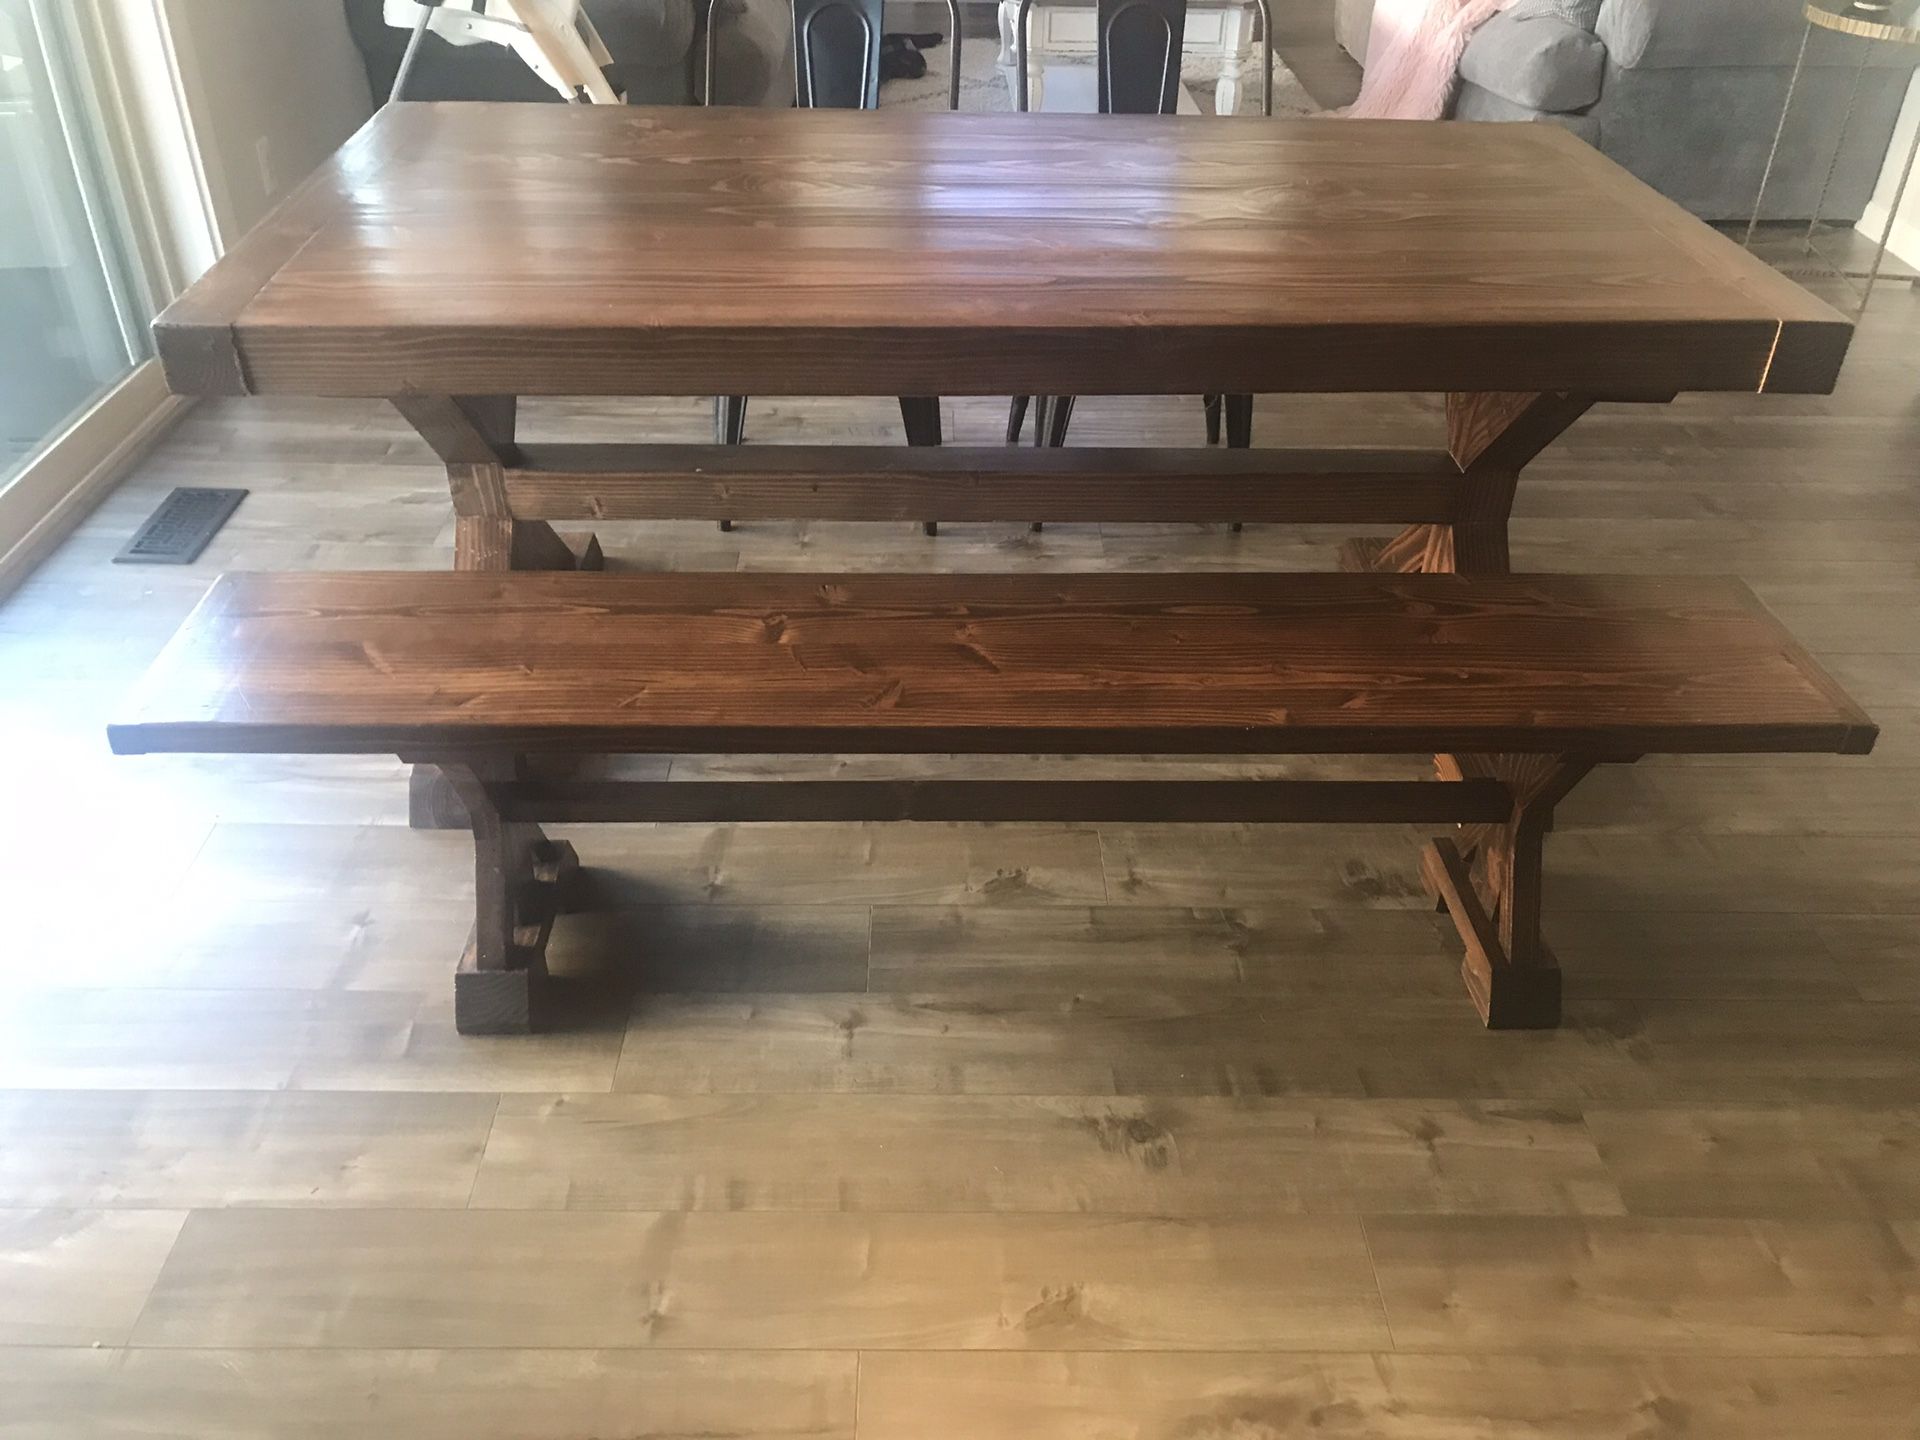 Farmhouse Style Kitchen Table with Bench and Chairs!